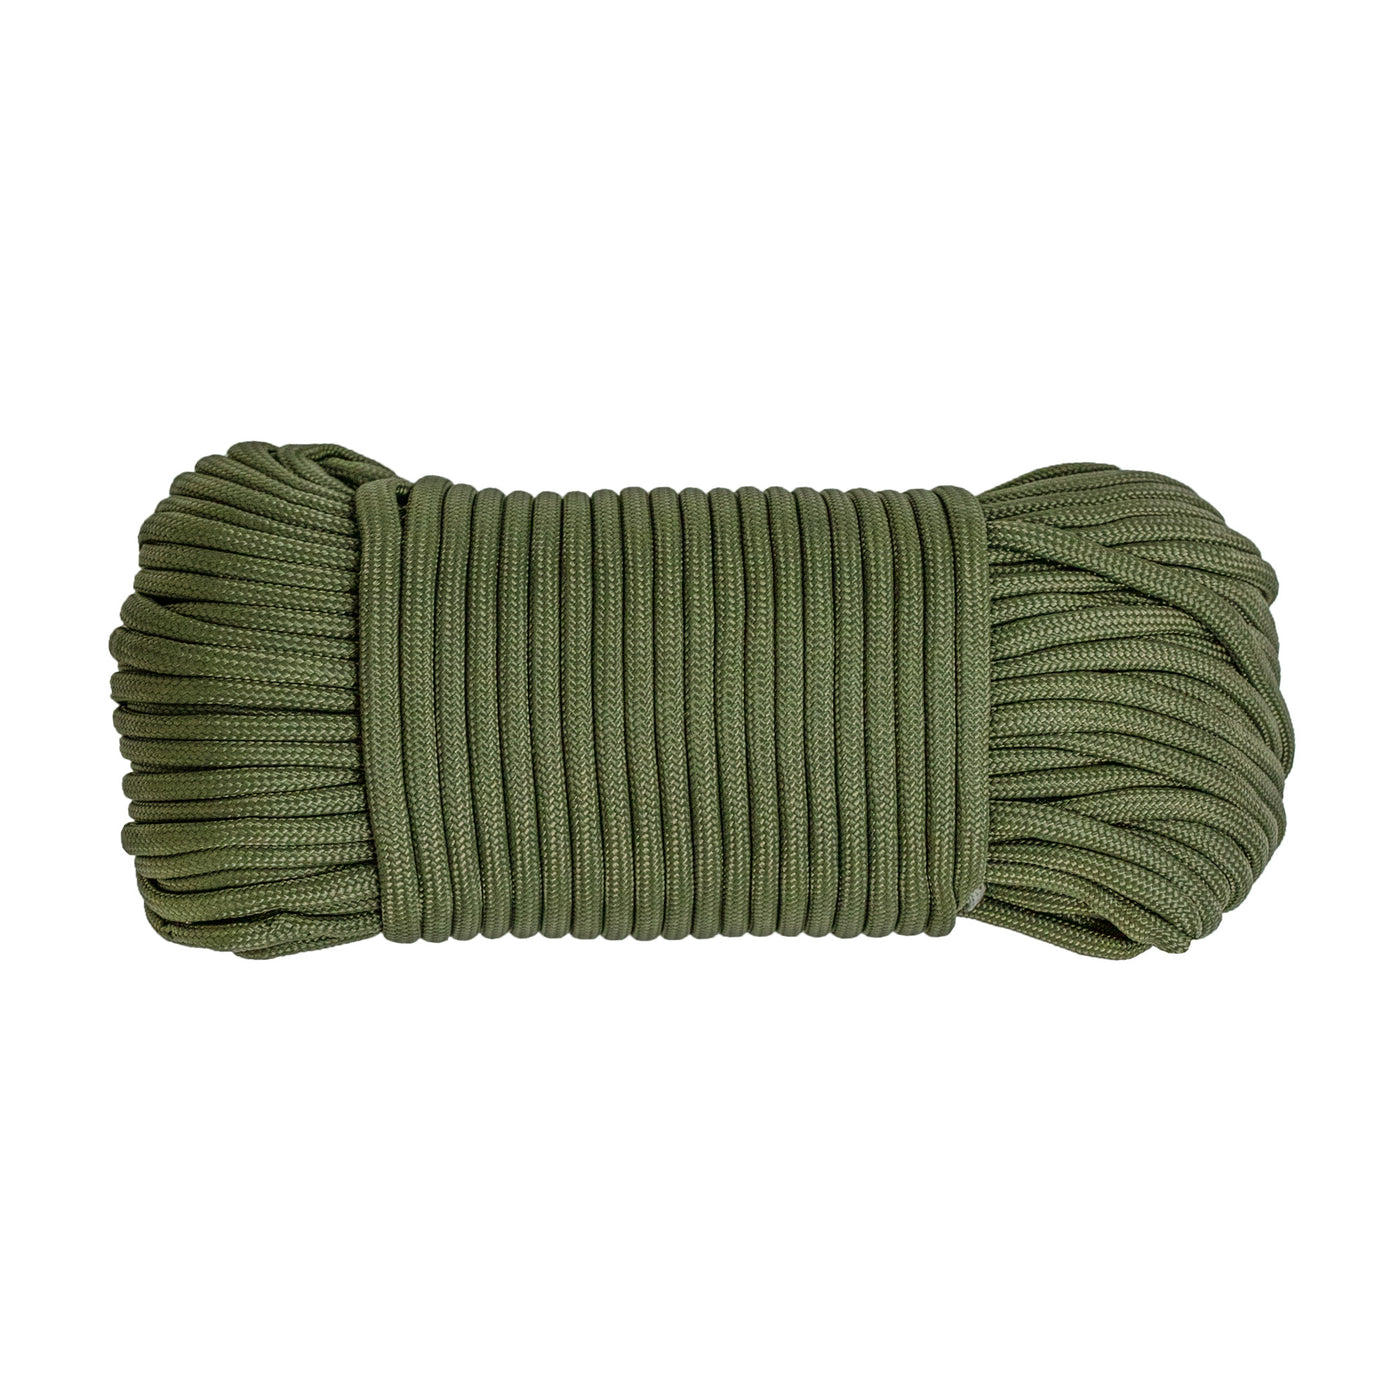 Mossy Oak Paracord Olive Drab 100 Foot